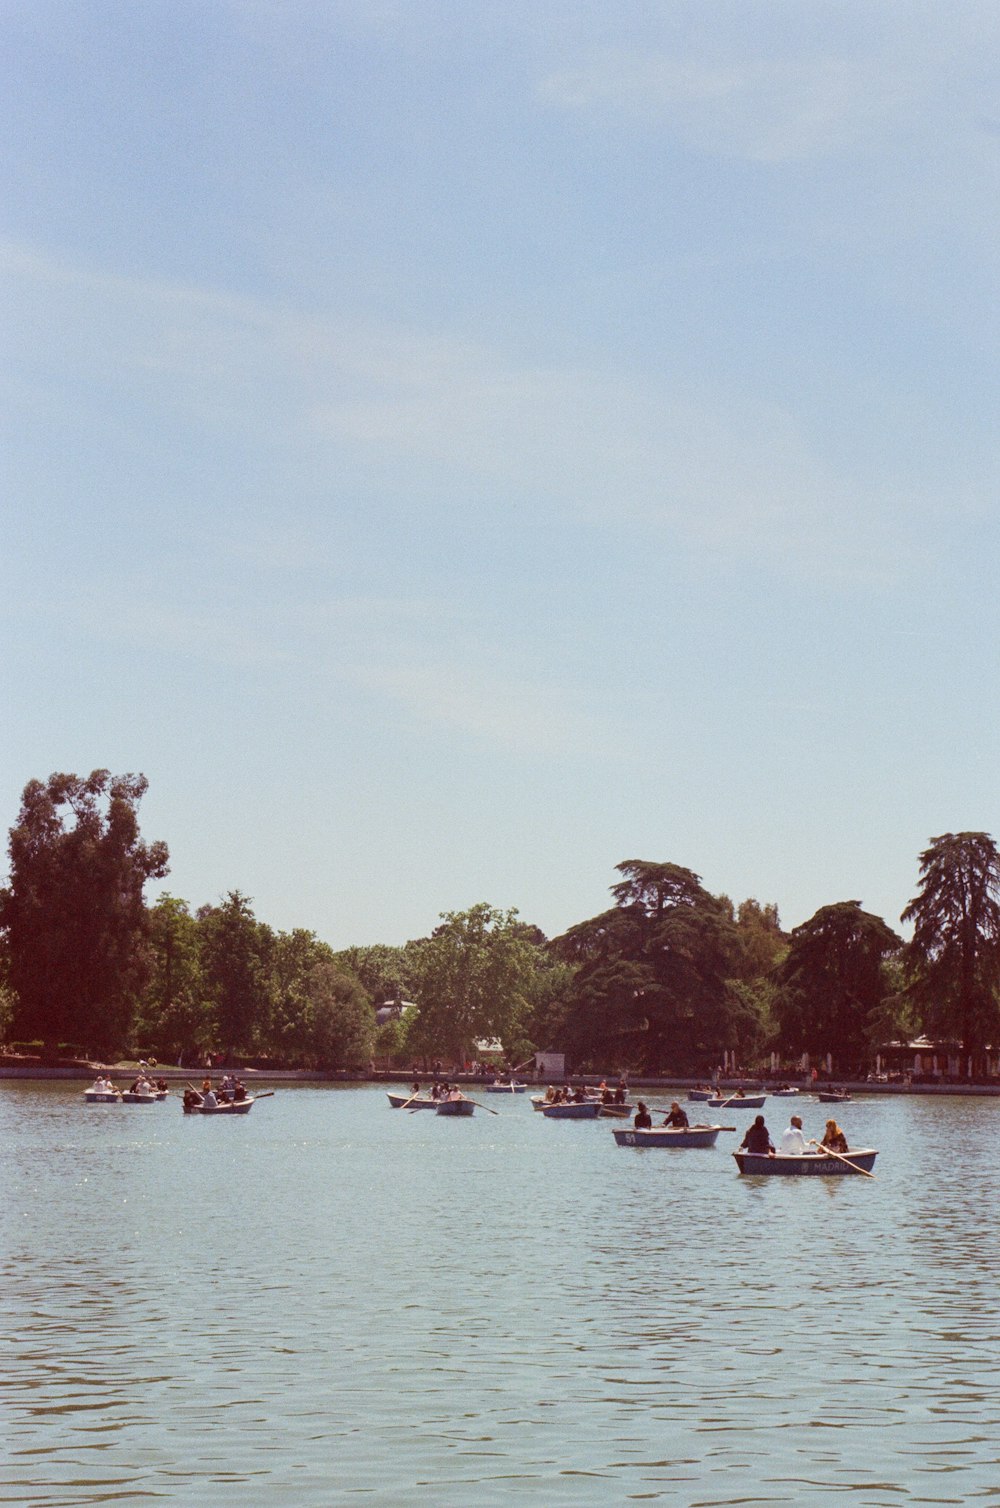 a group of people in small boats on a lake